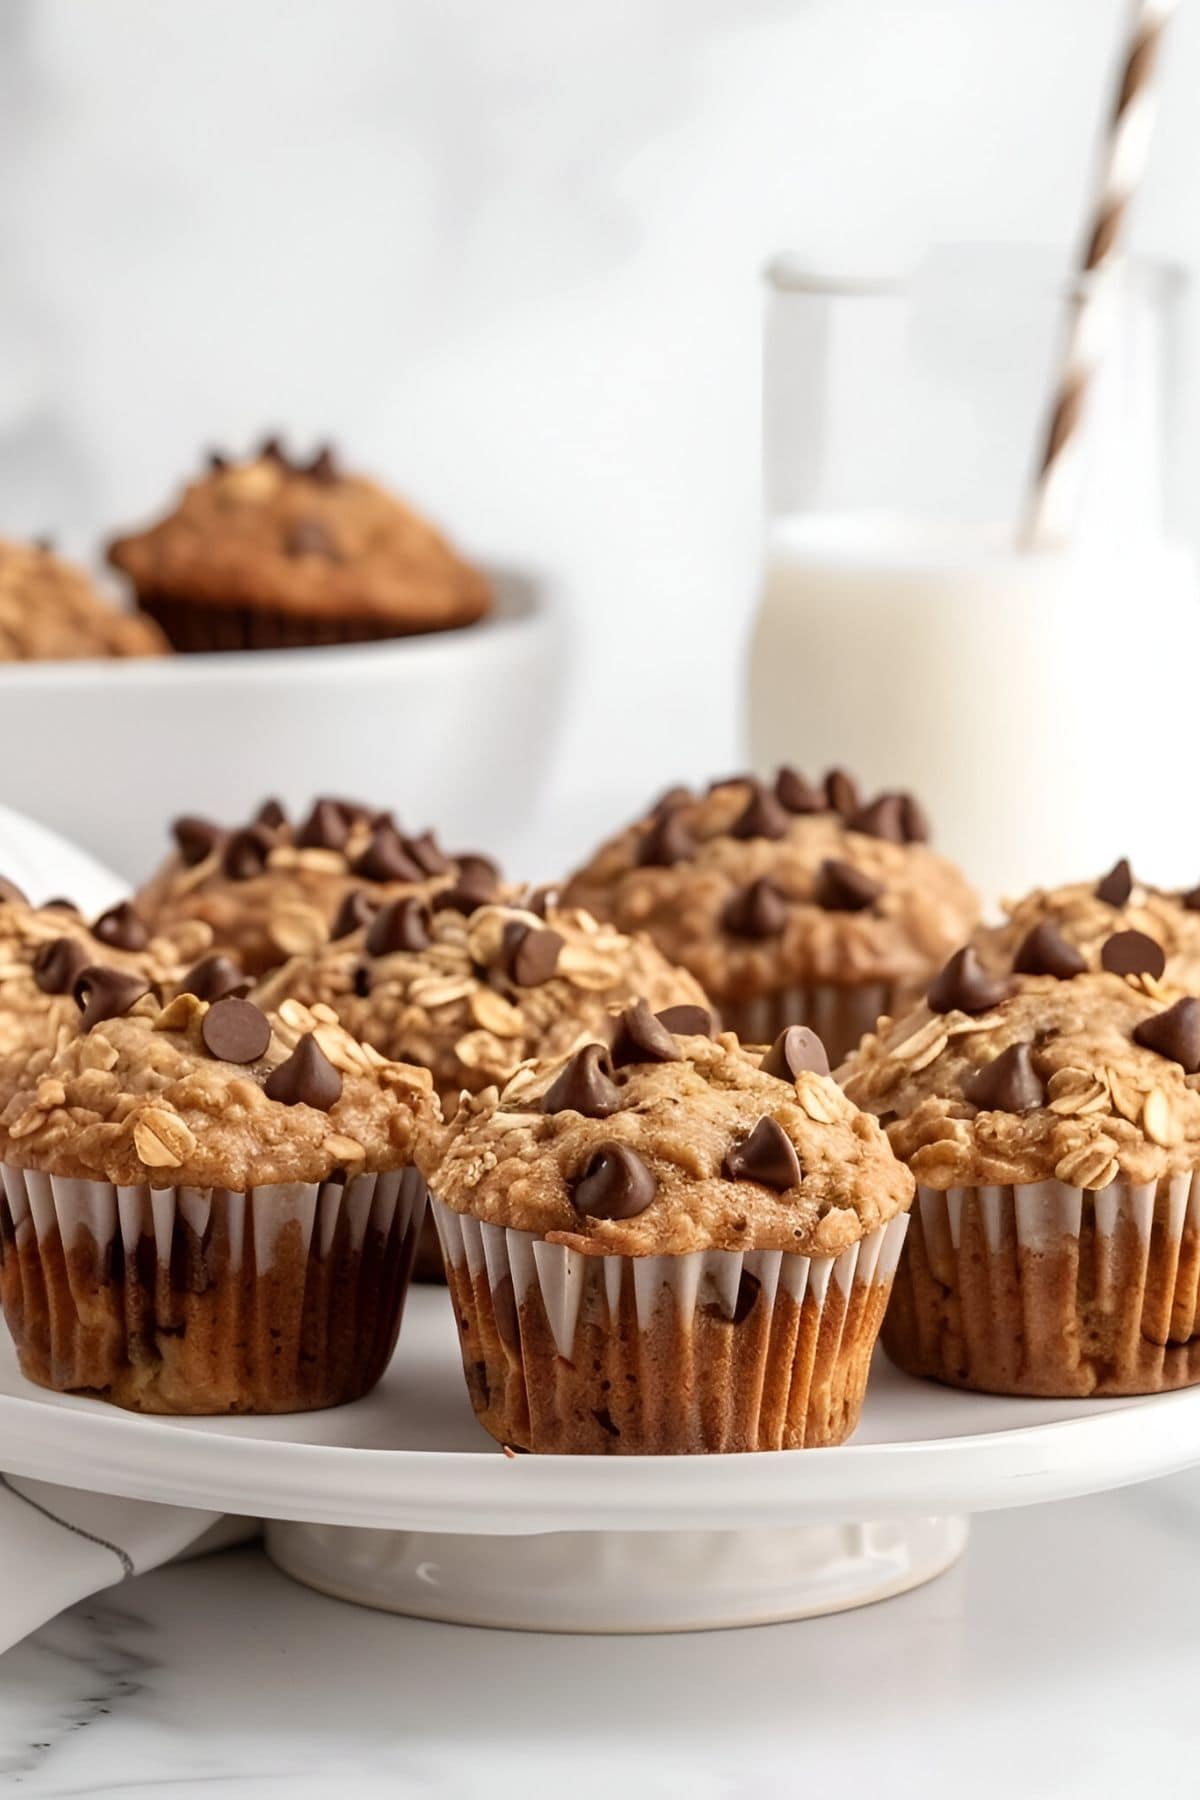 Chocolate Chip Oatmeal Muffins on a Cake Plate with More Muffins in a Bowl in the Background and a Glass of Milk with a Straw